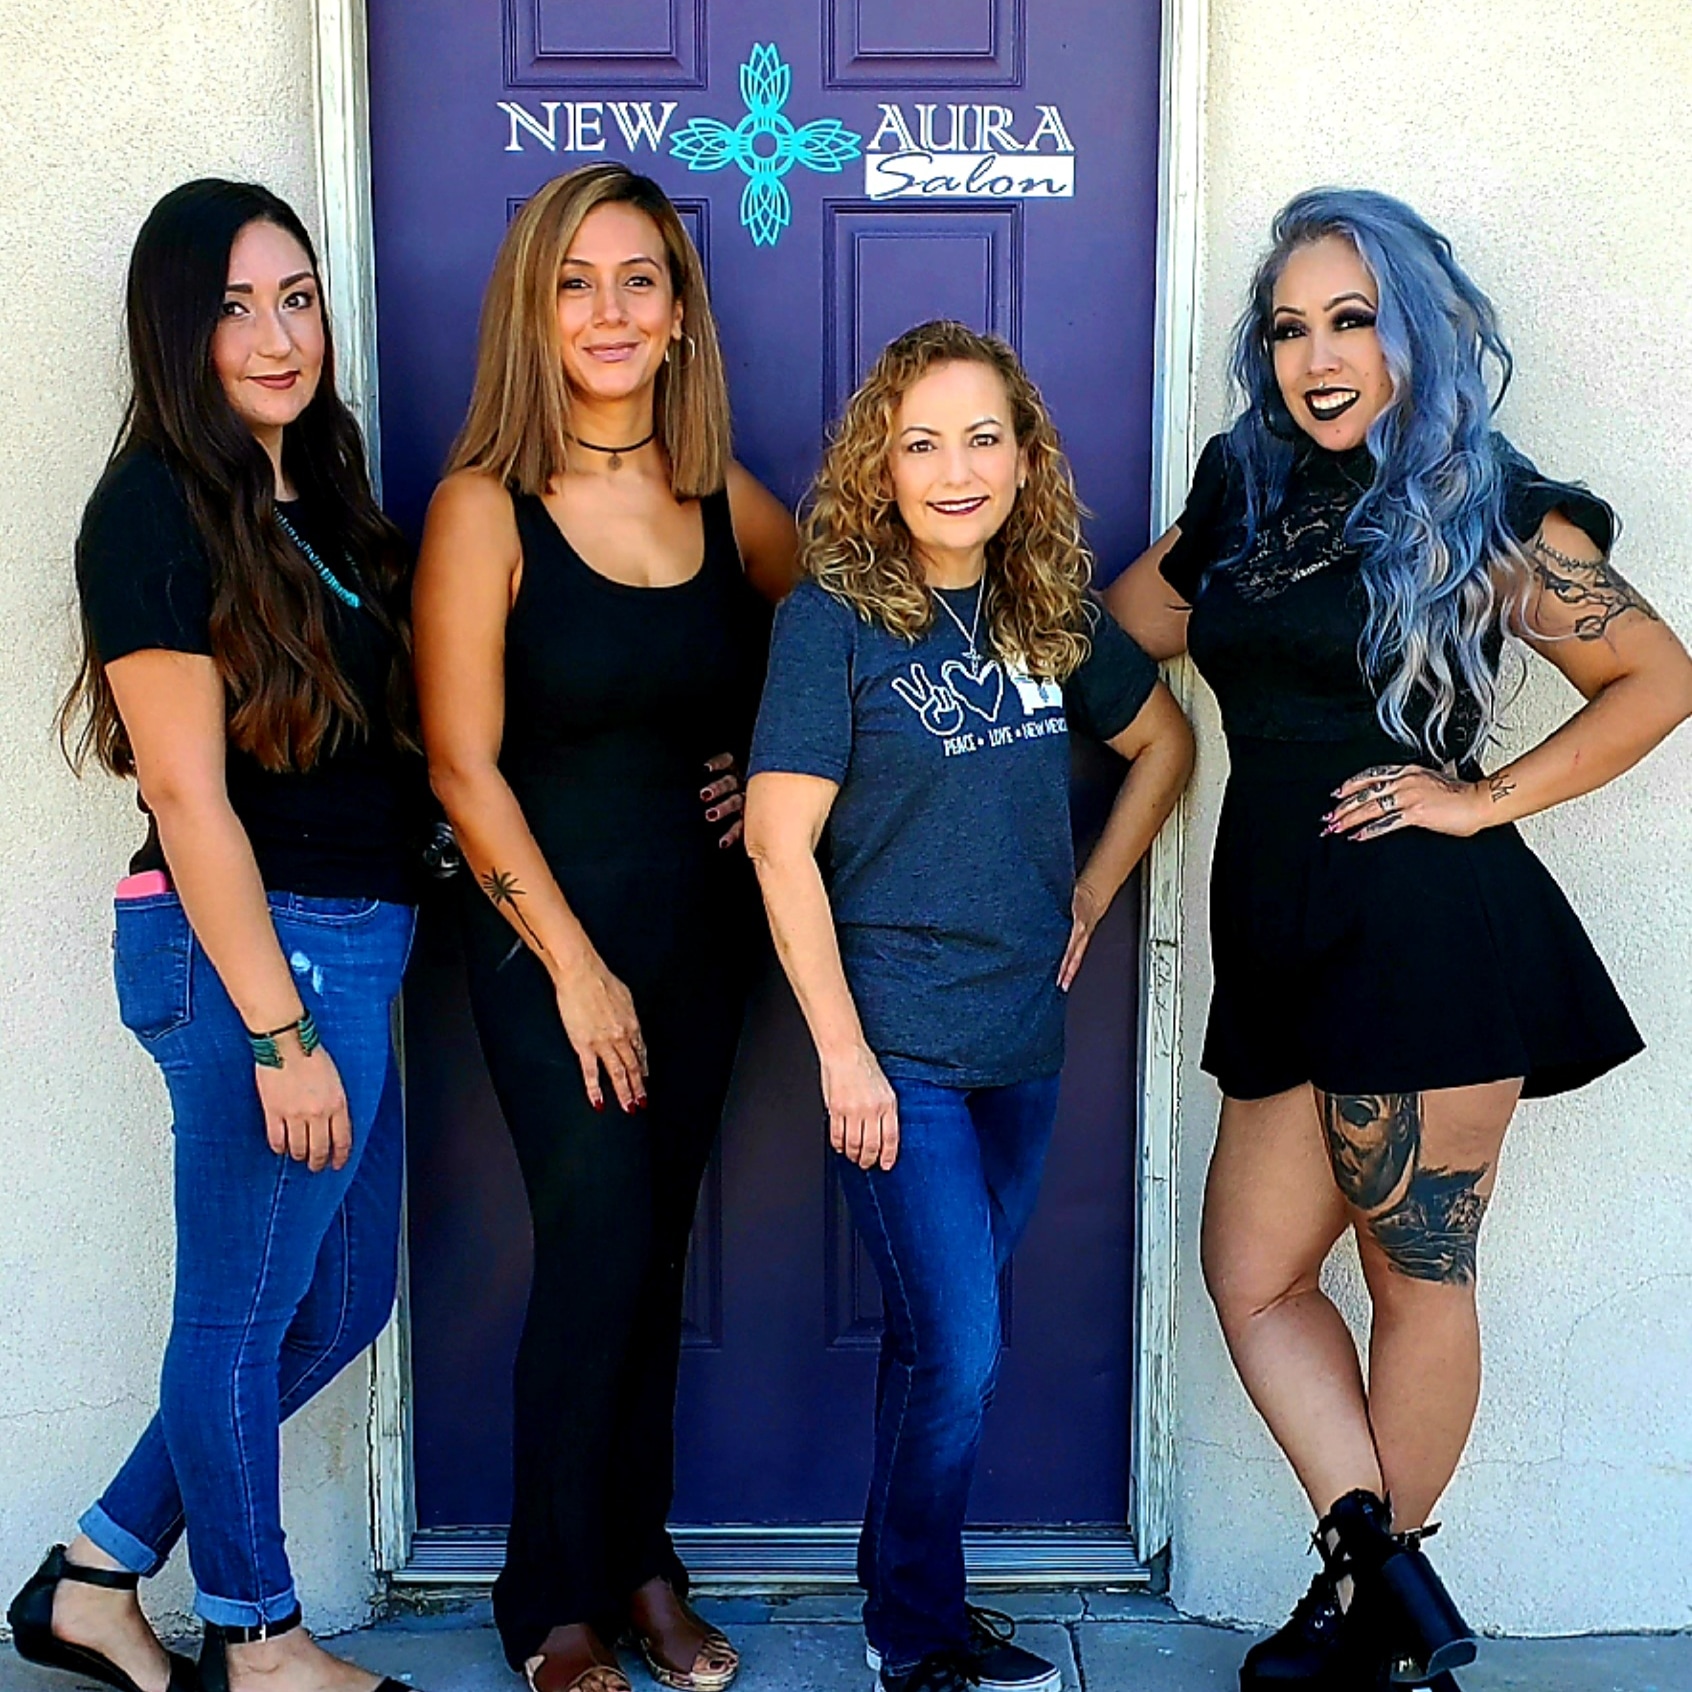 New Aura Salon Deming 113 N Silver Ave, Deming New Mexico 88030